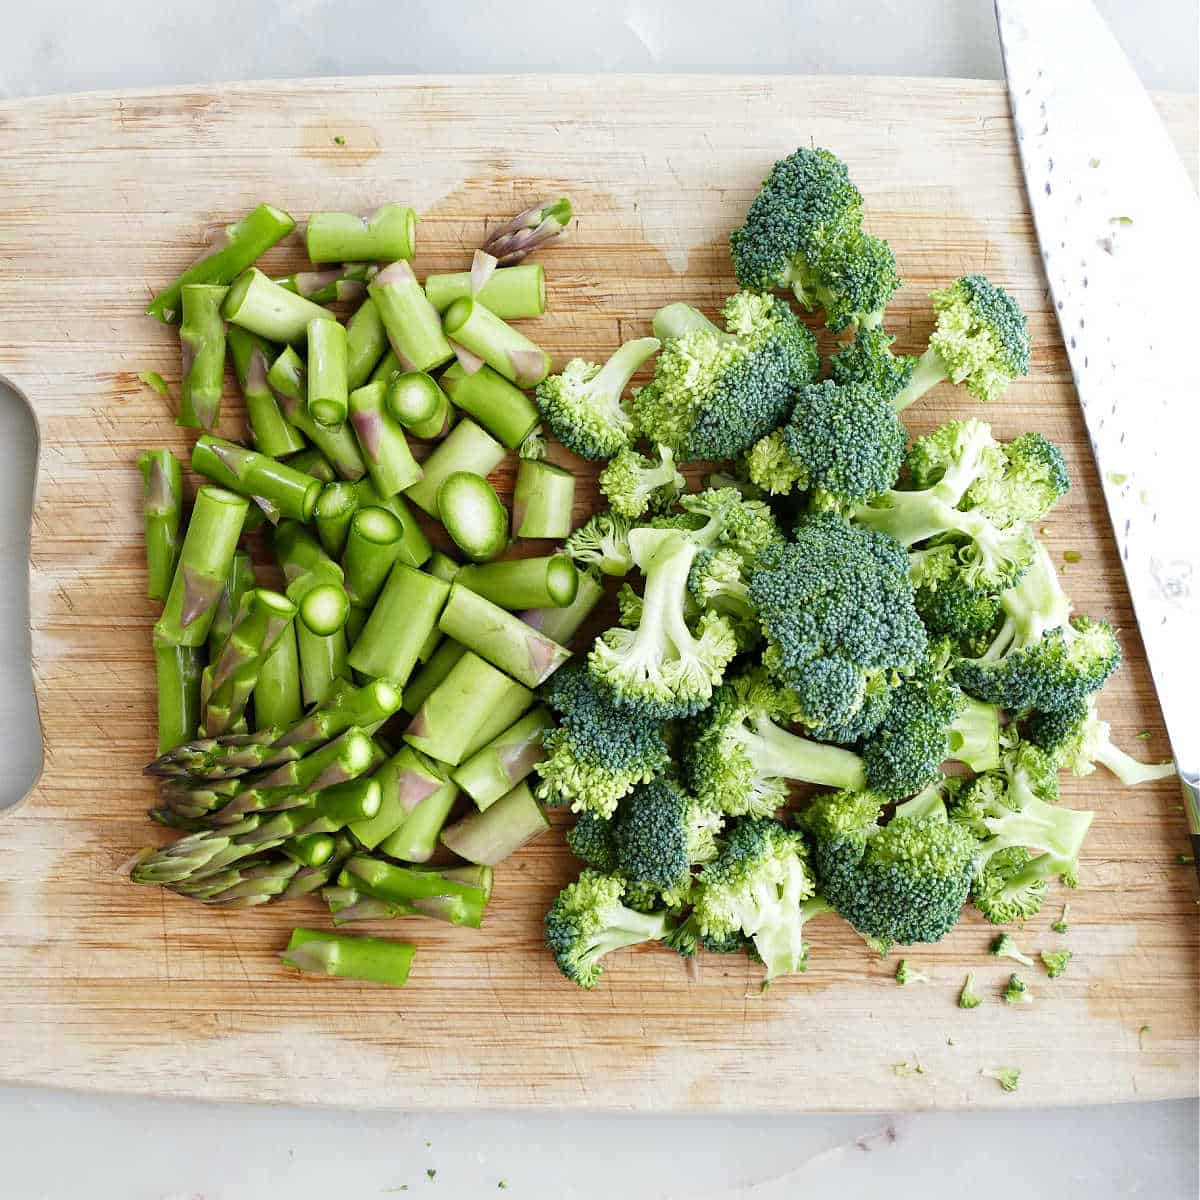 Chopped broccoli florets and asparagus on a cutting board with a knife.